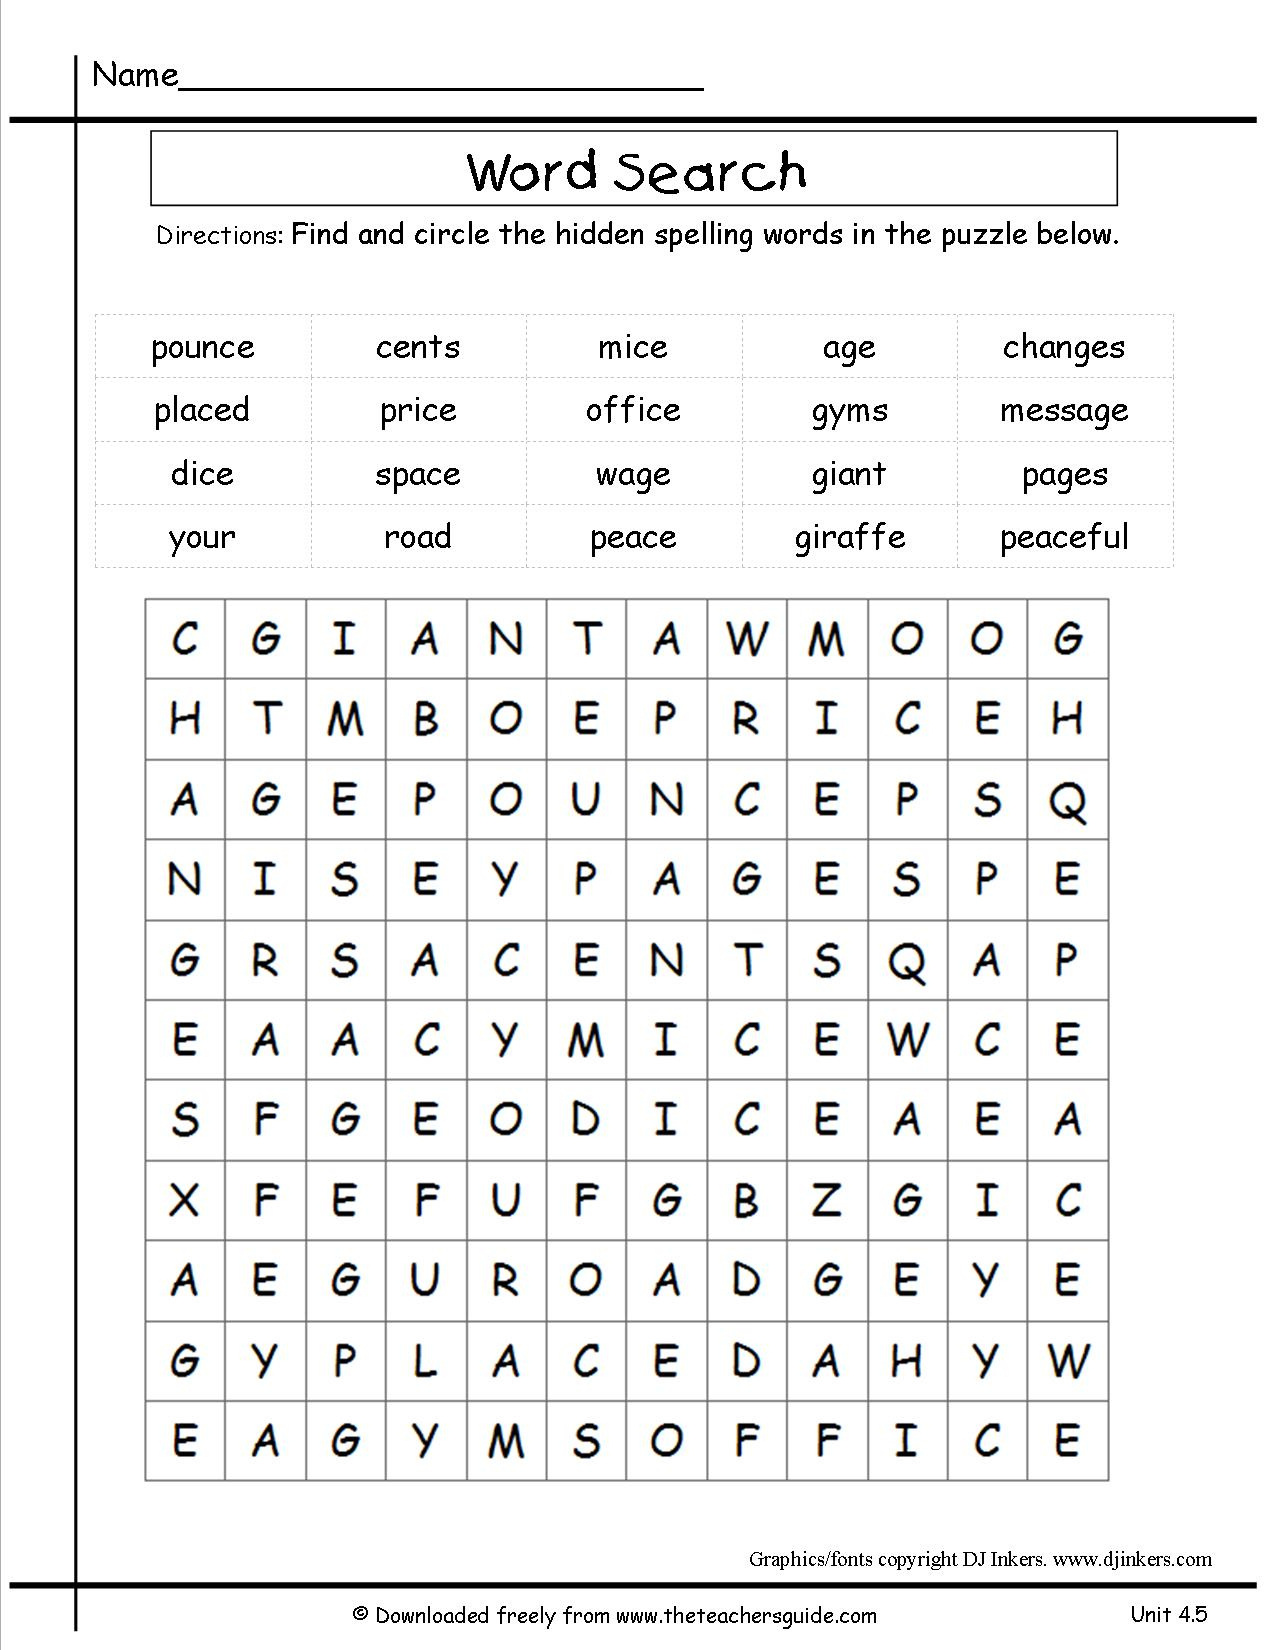 Printable Crossword Puzzle For Grade 3